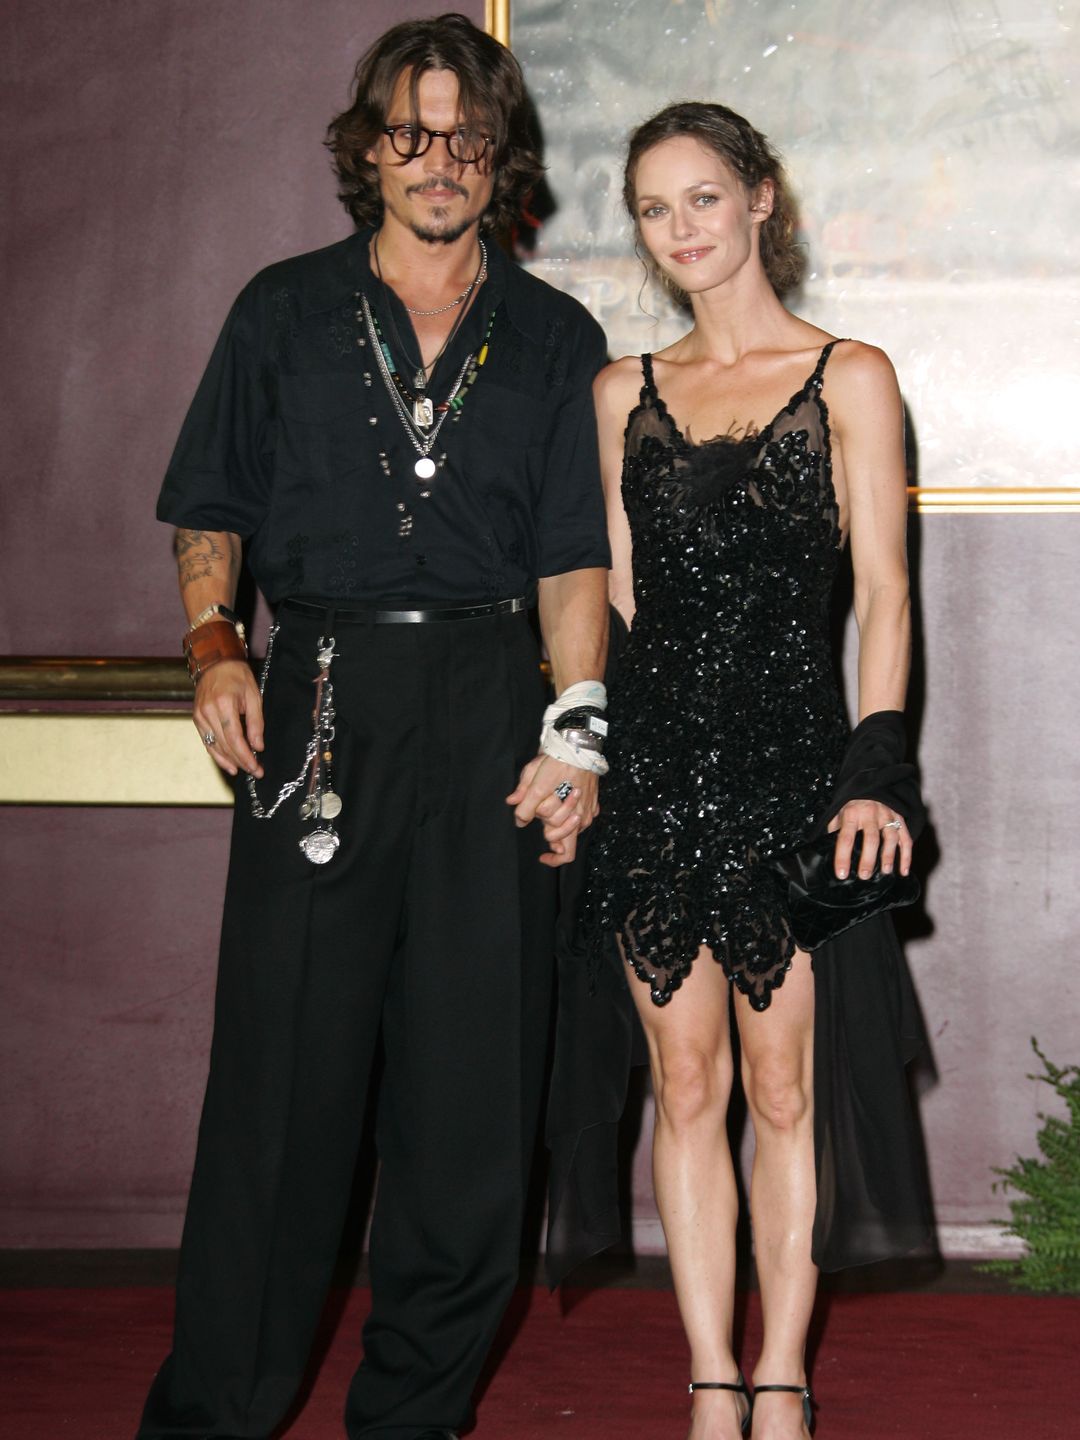 Johnny and Vanessa posing for a photo together at an event